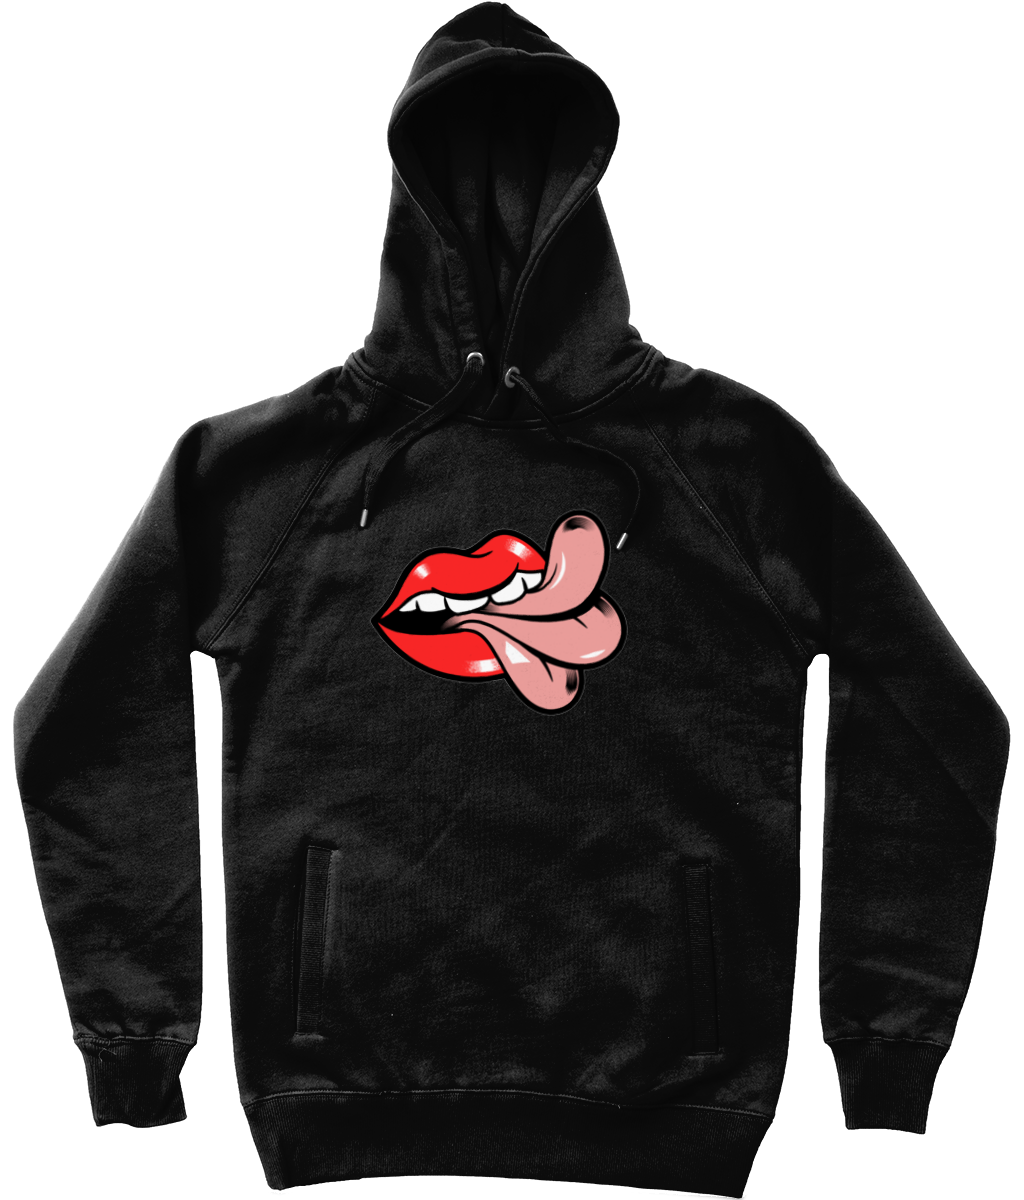 'Cheeky' Graphic Mouth & Tongue Trendy Unisex Pullover Hoodie